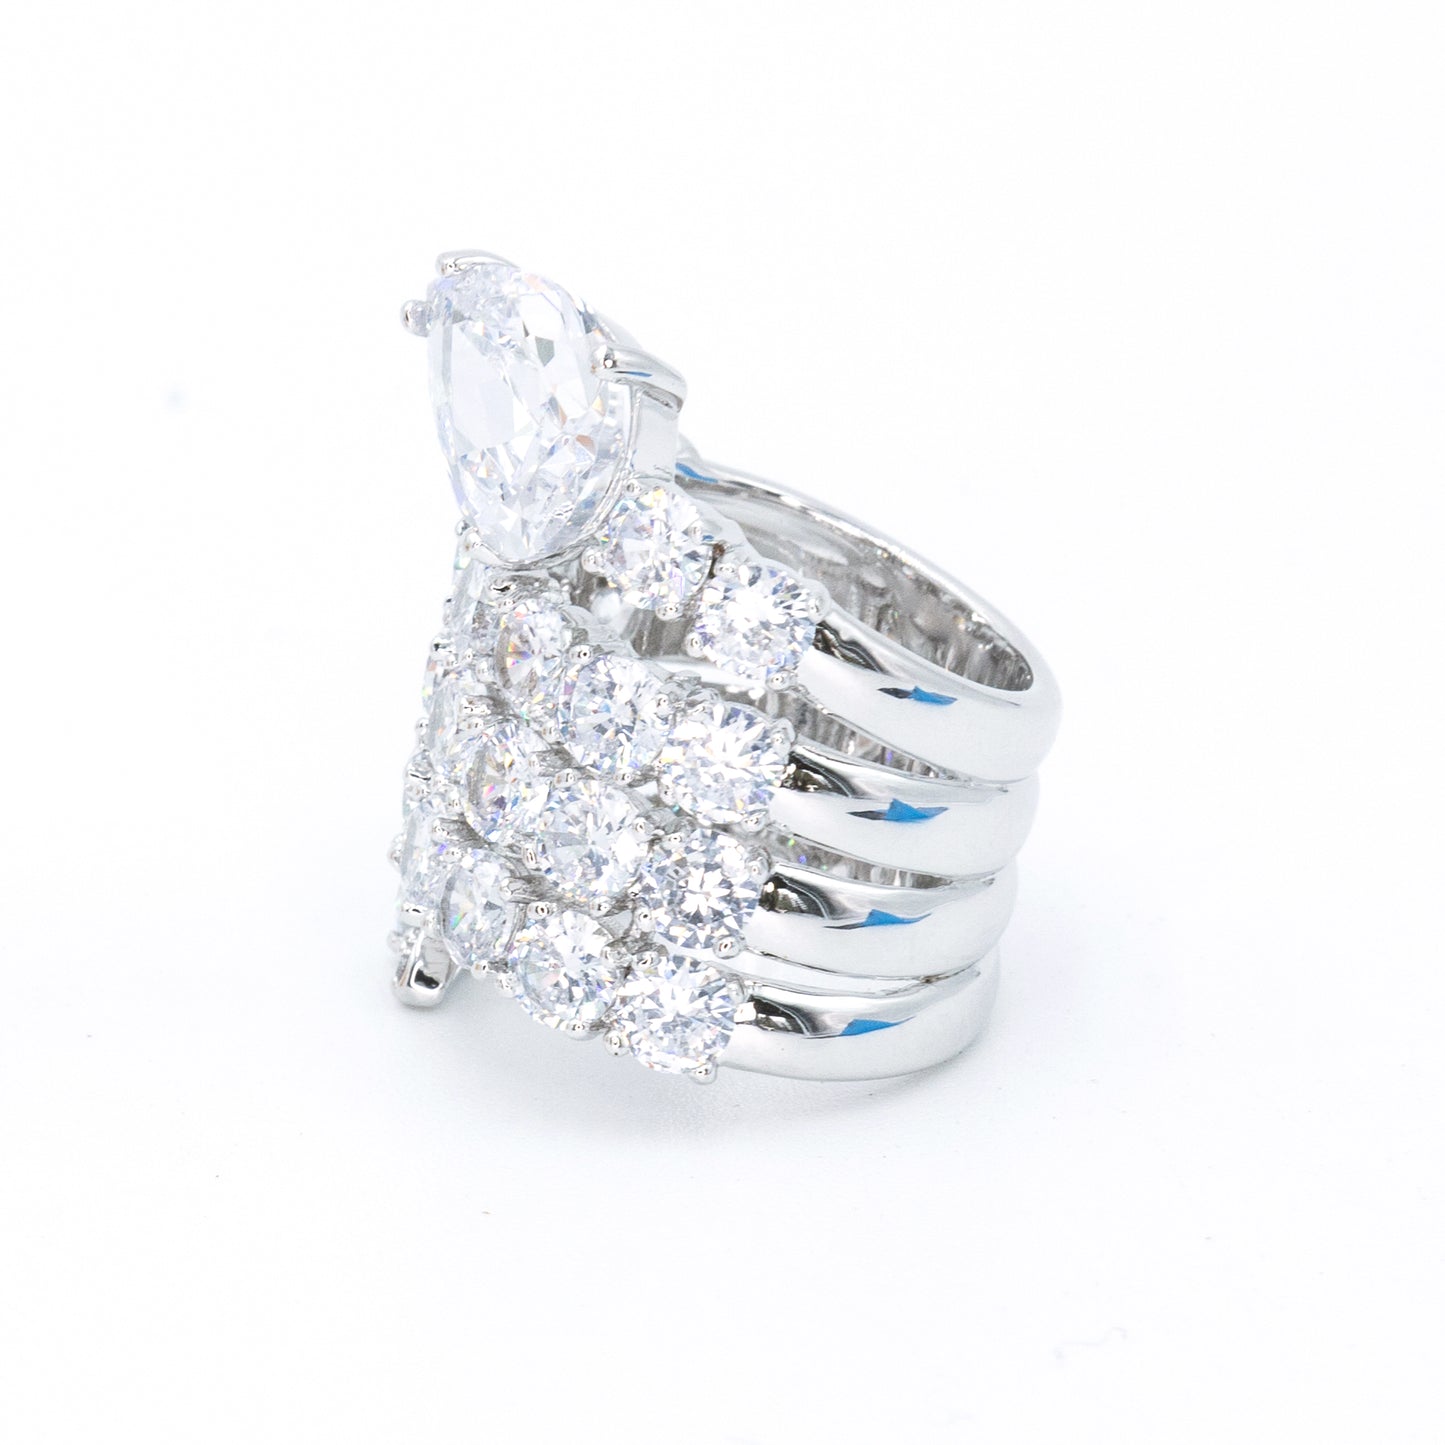 Snakelike cocktail ring w/ teardrop and round 3A CZ stones rhodium plated